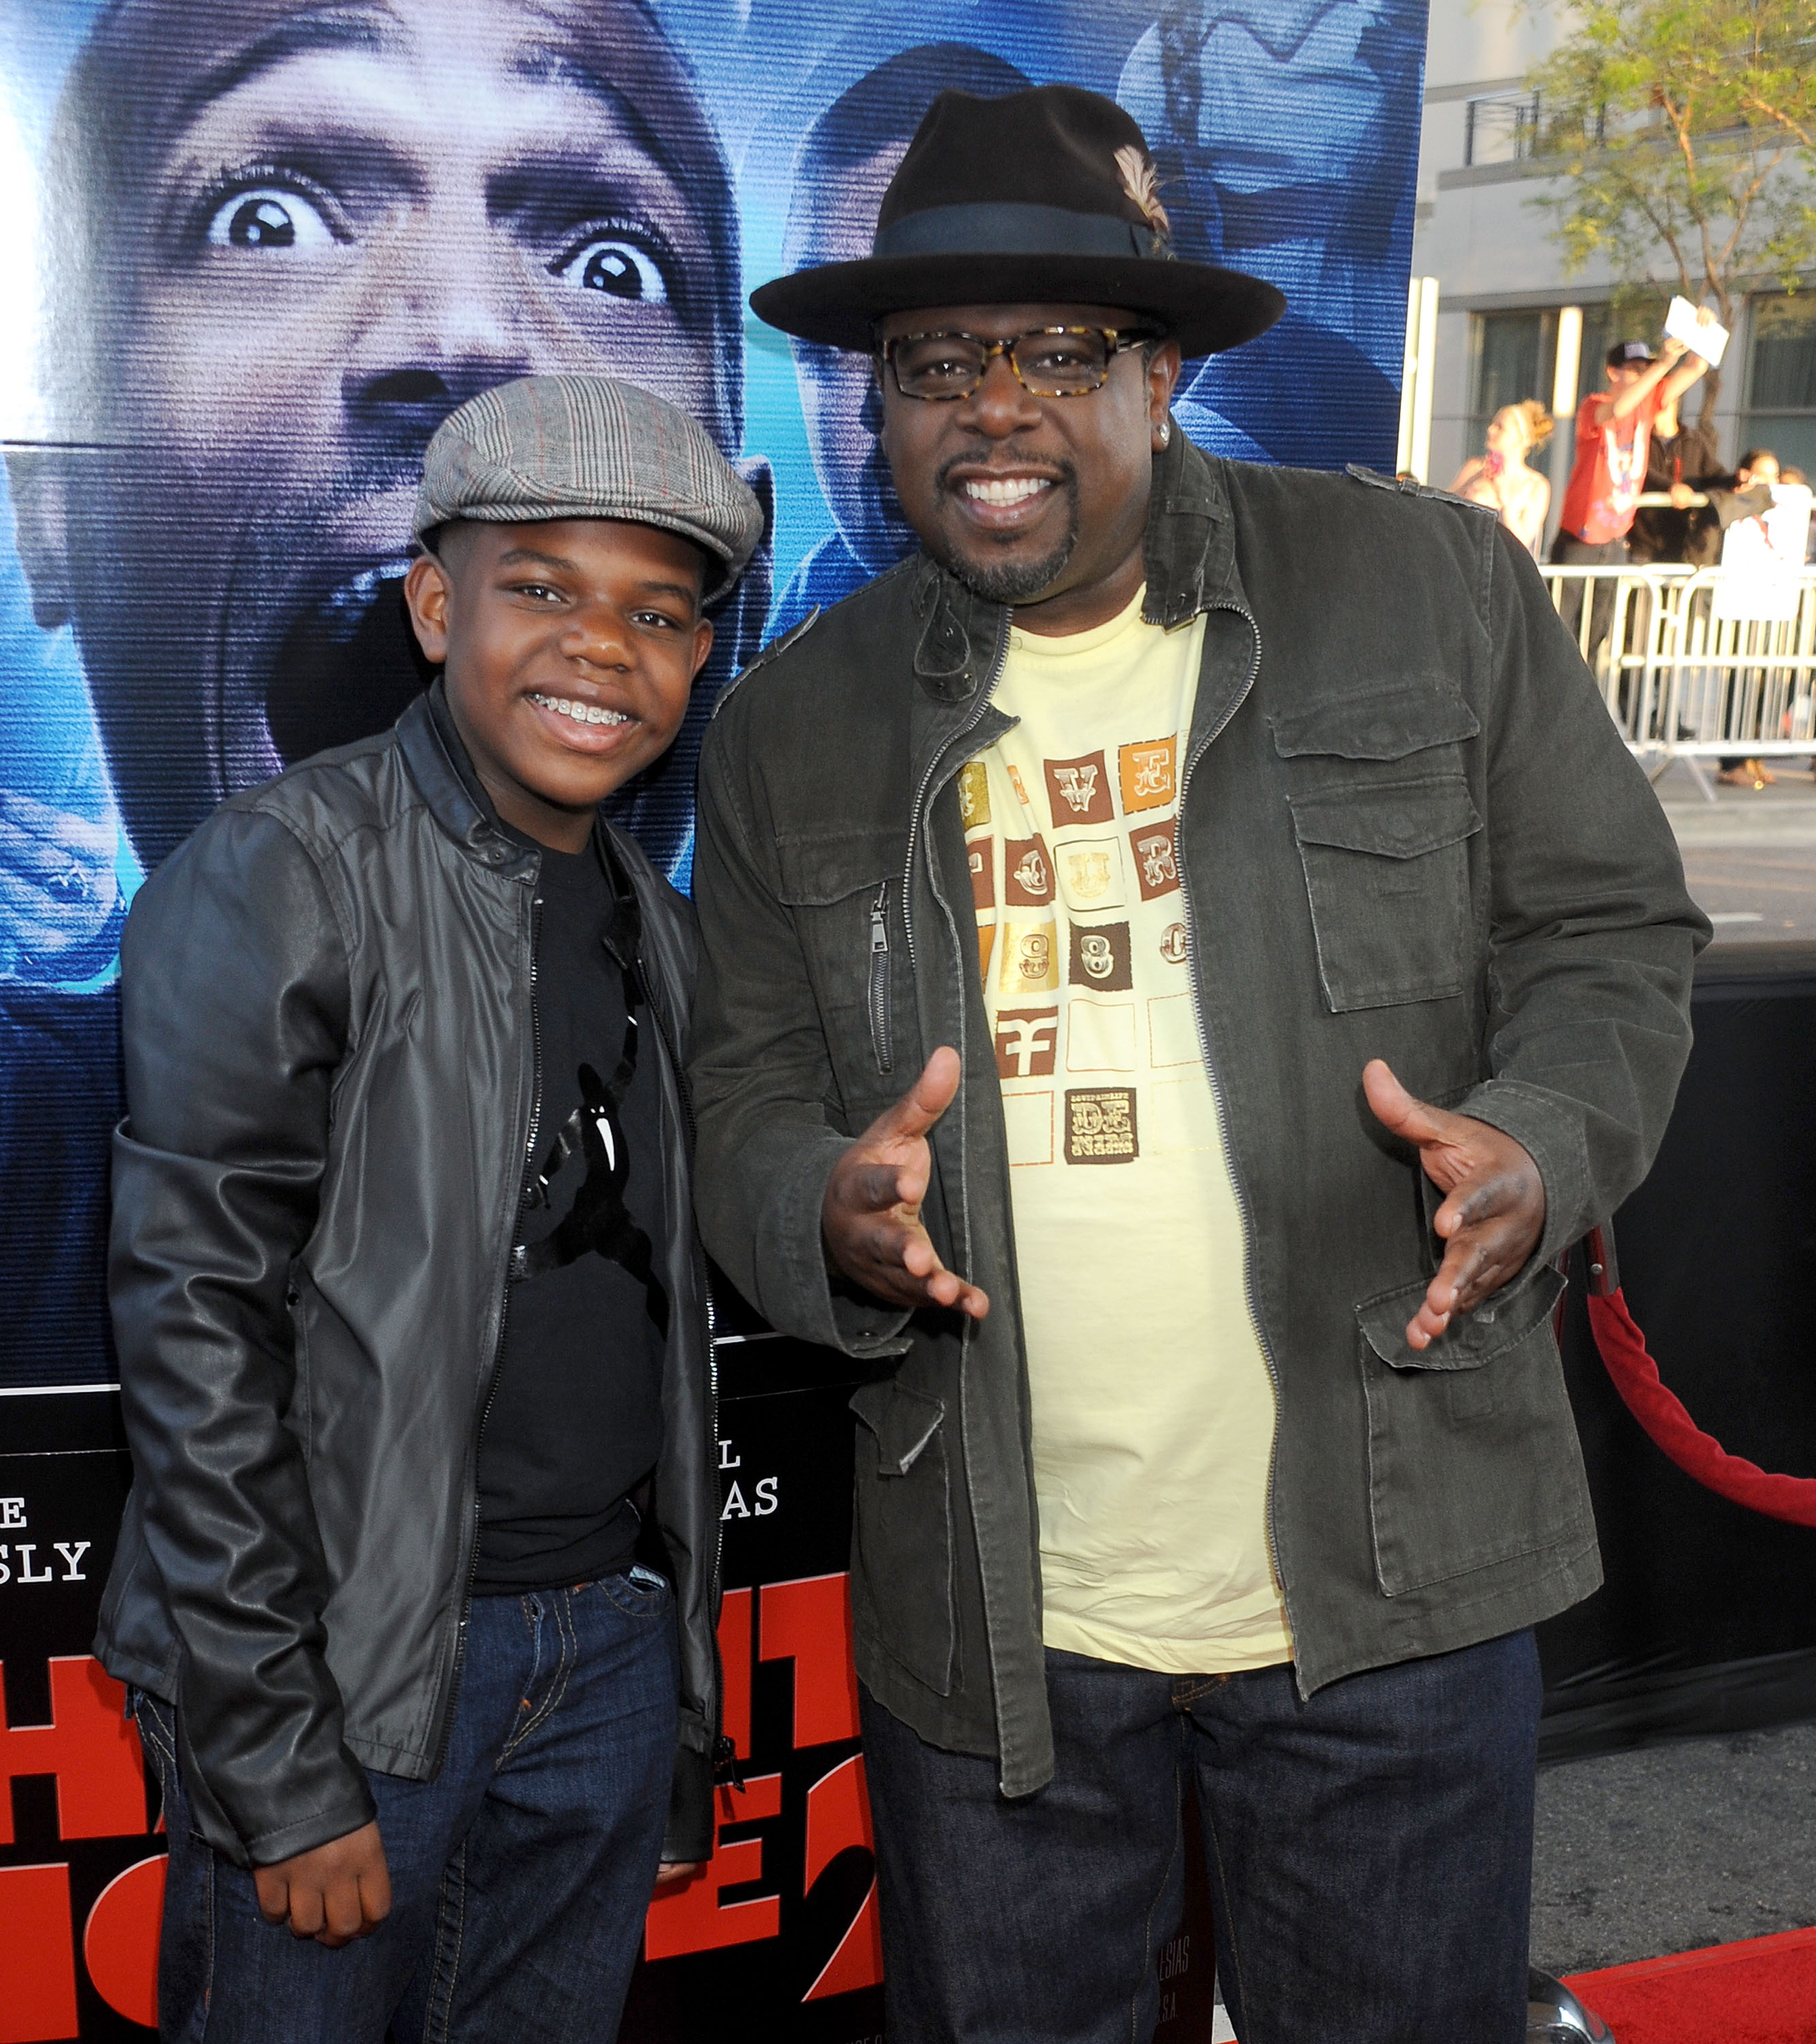 Cedric the Entertainer and son Croix Kyles arrive at the Los Angeles premiere of "A Haunted House 2" at Regal Cinemas L.A. Live on April 16, 2014, in Los Angeles, California. | Source: Getty Images